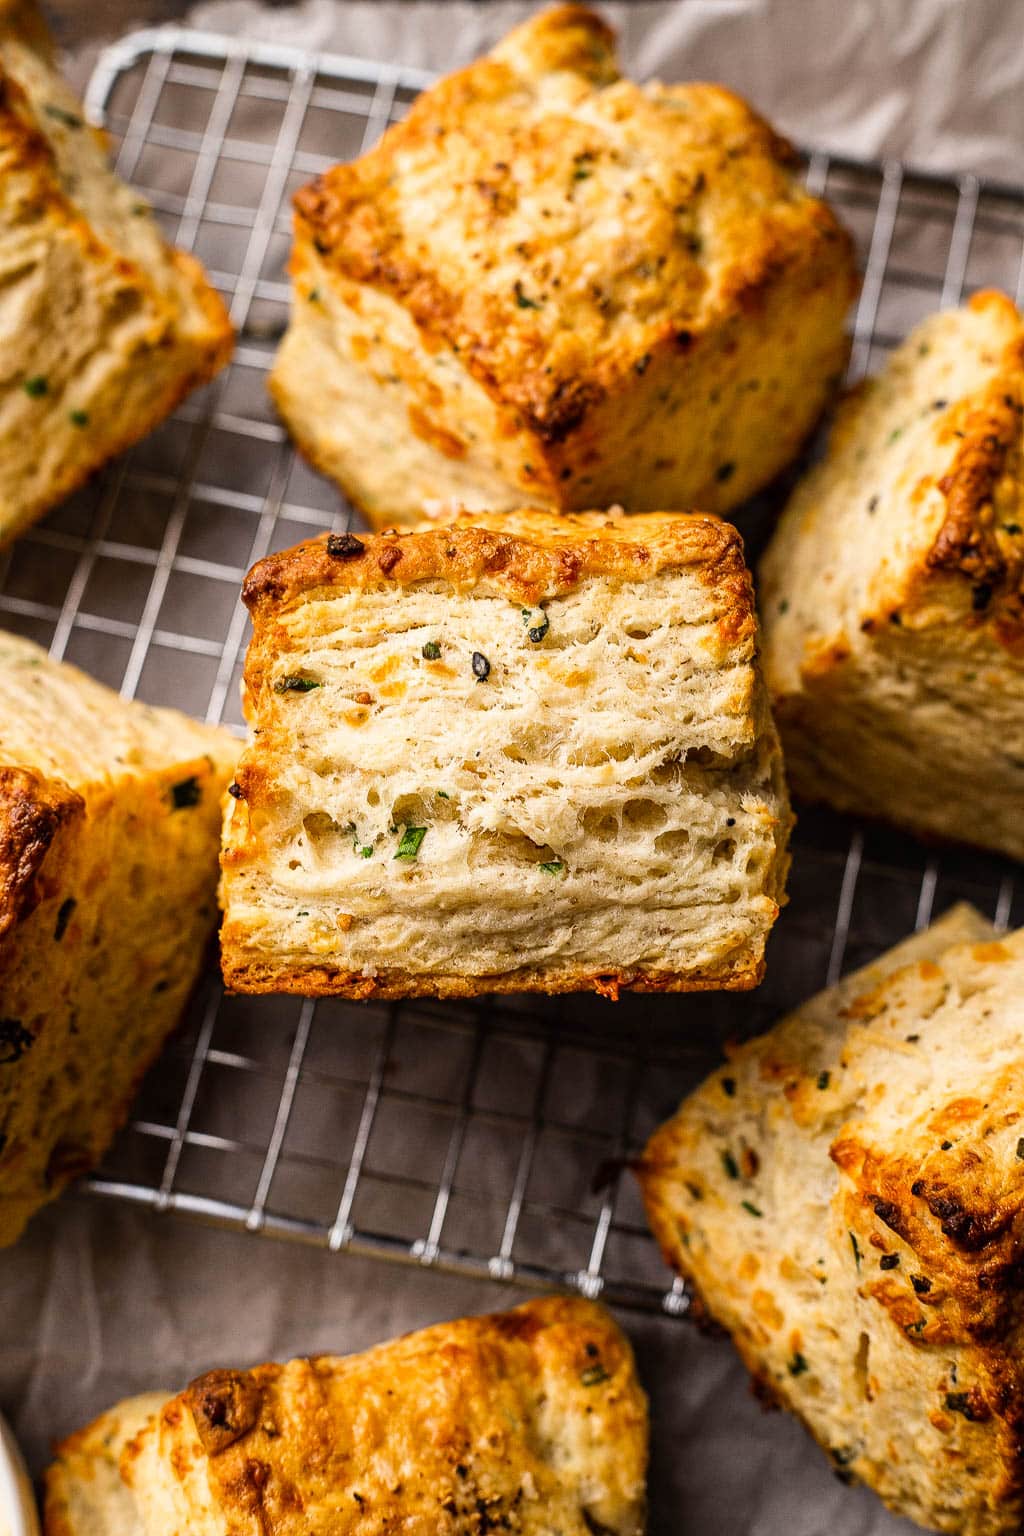 Cheddar chive biscuits